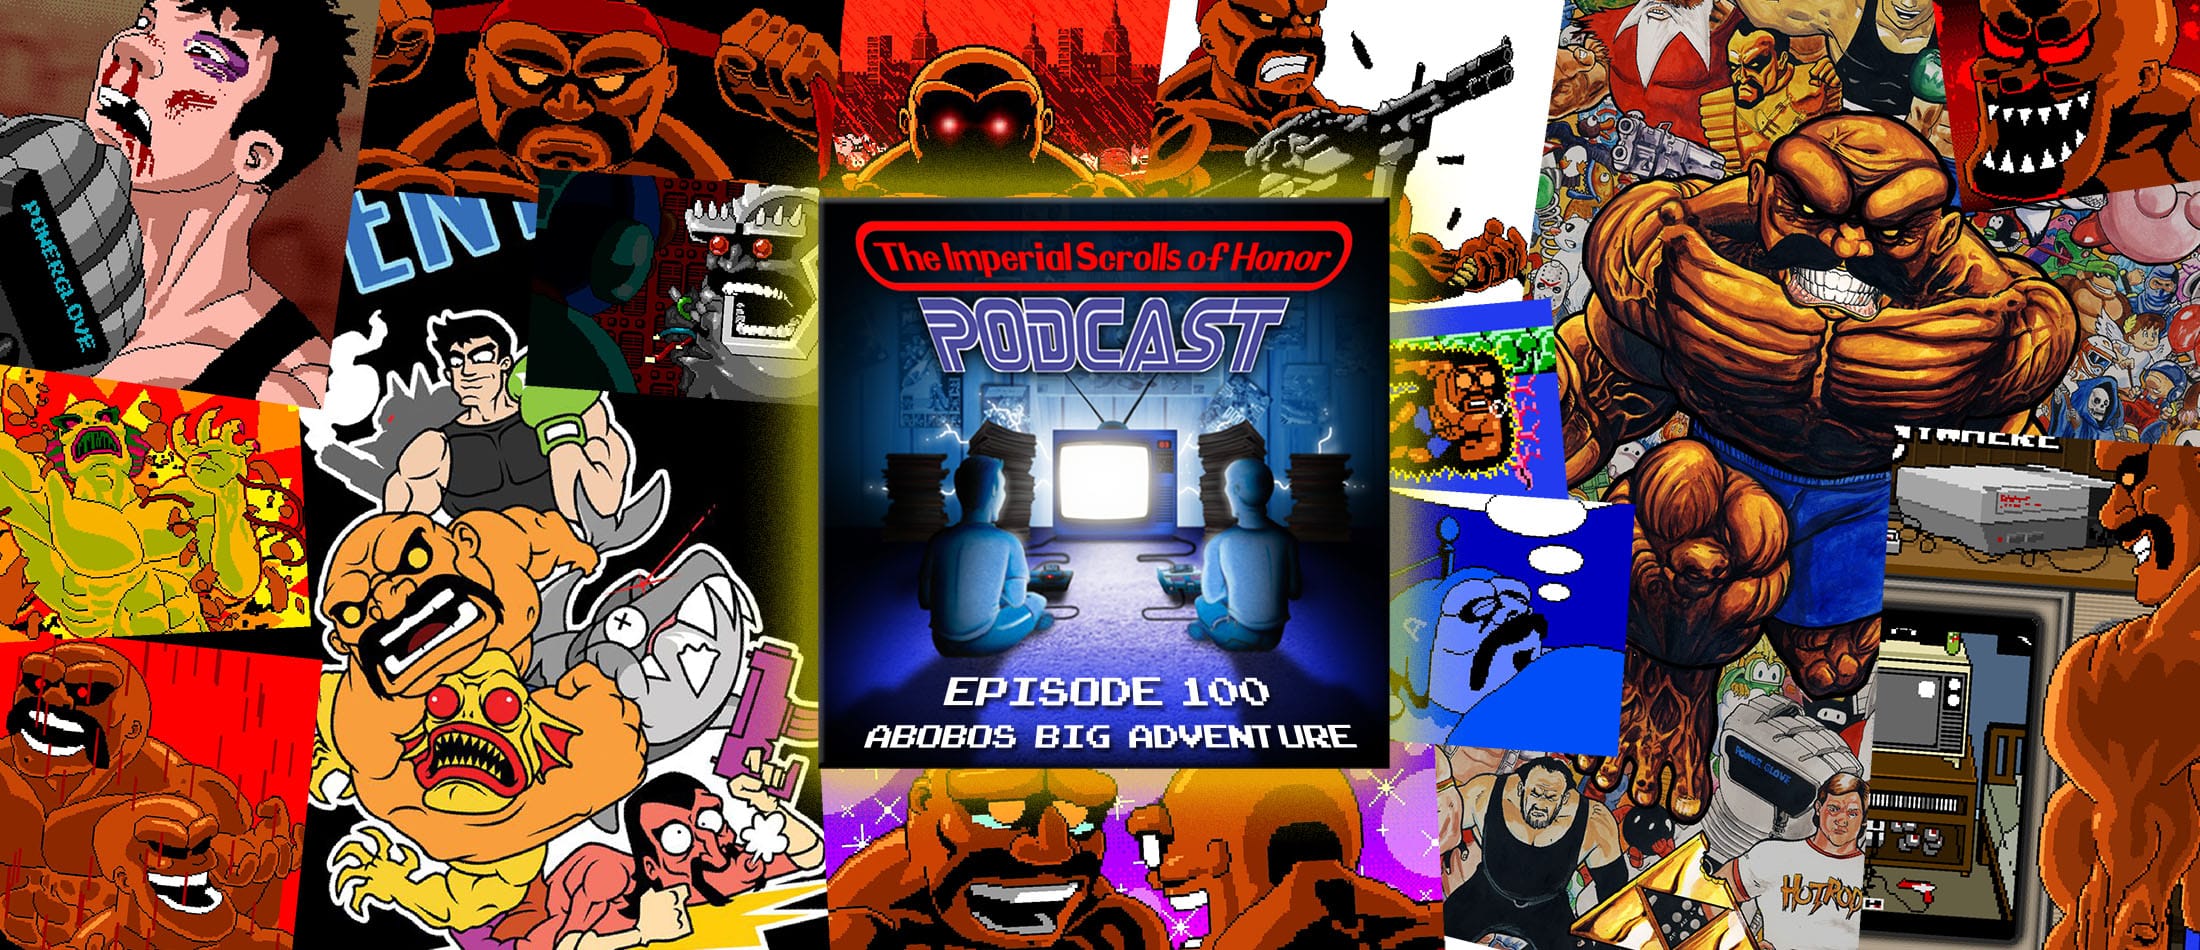 The Imperial Scrolls of Honor Podcast - Ep 100 - Abobo's Big Adventure